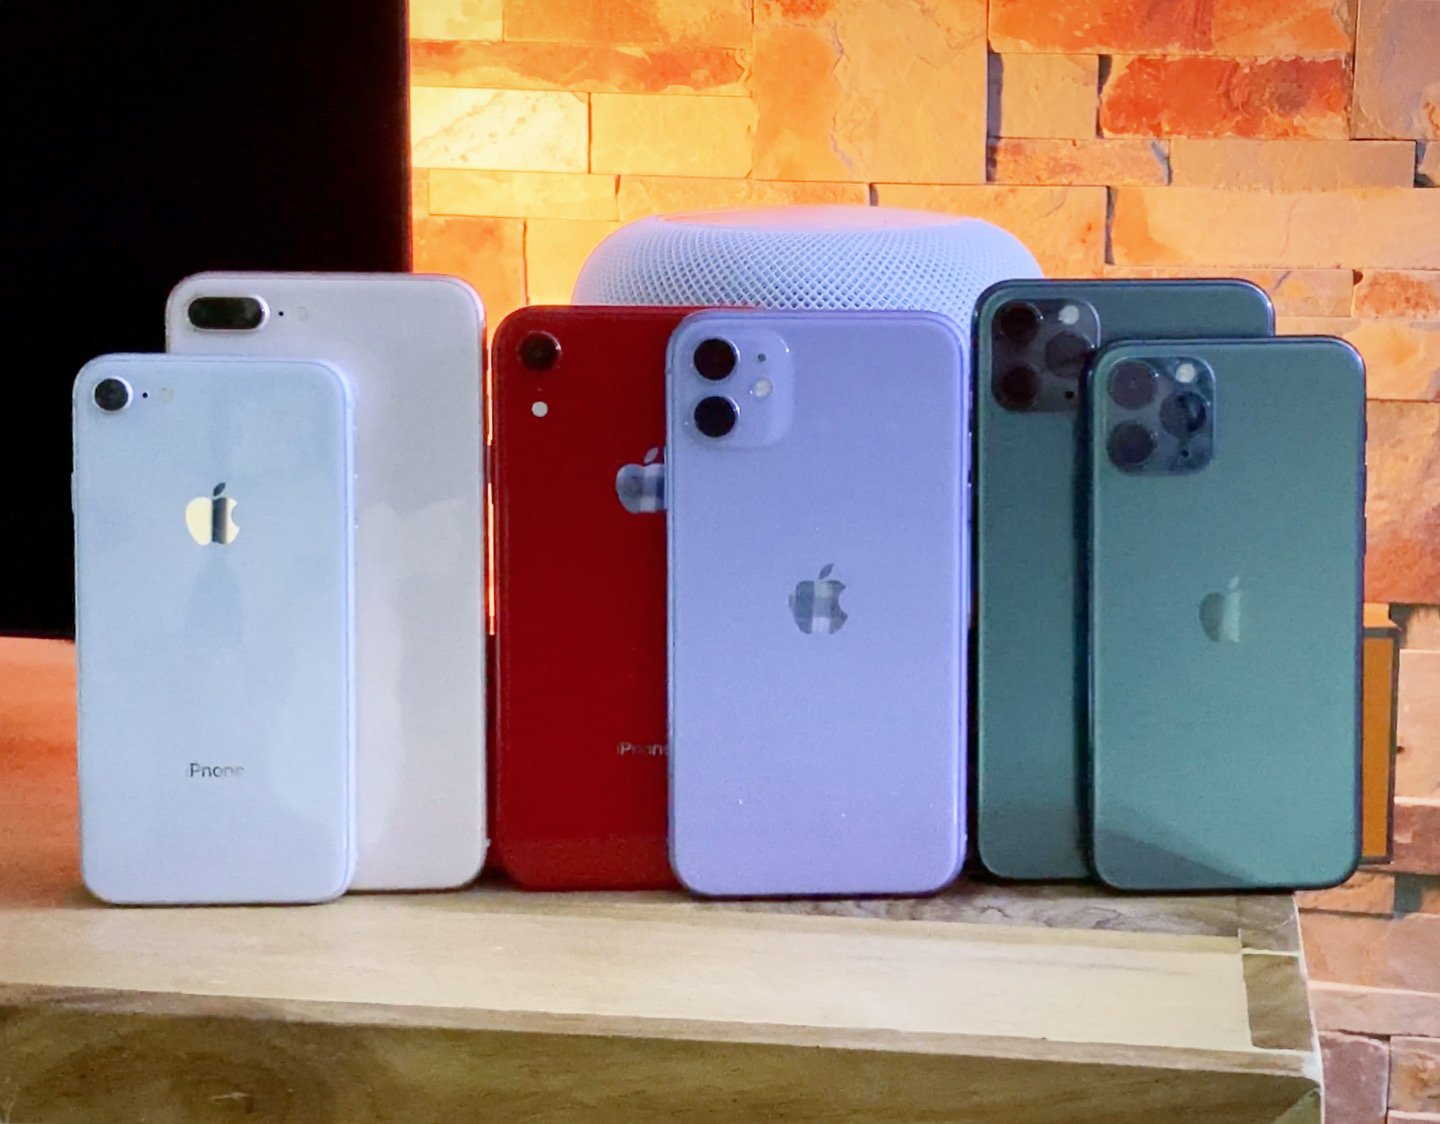 iPhone 8, XR, 11 lineup